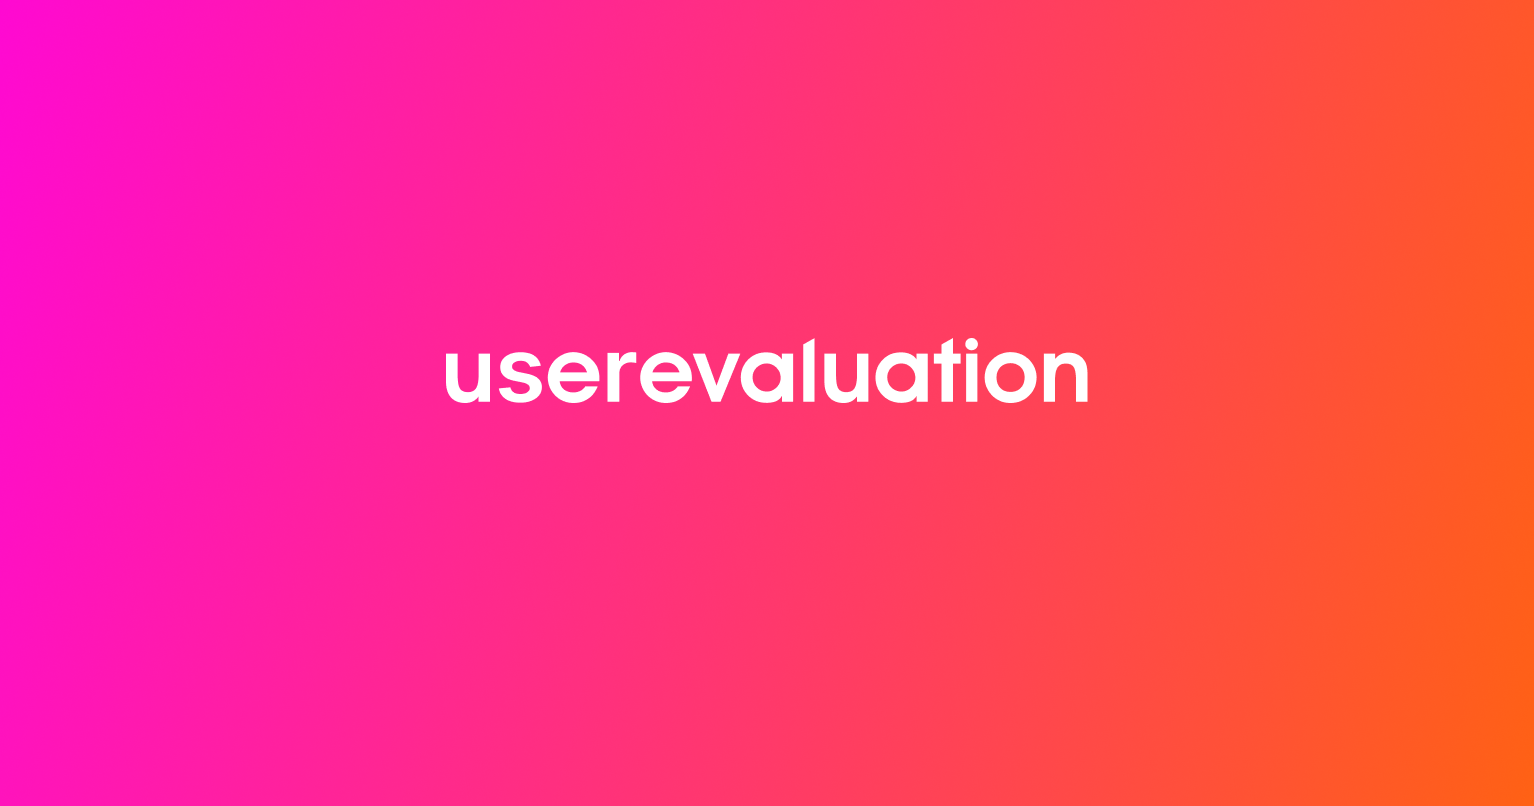 User Evaluation - A tool that provides insights from customer conversations